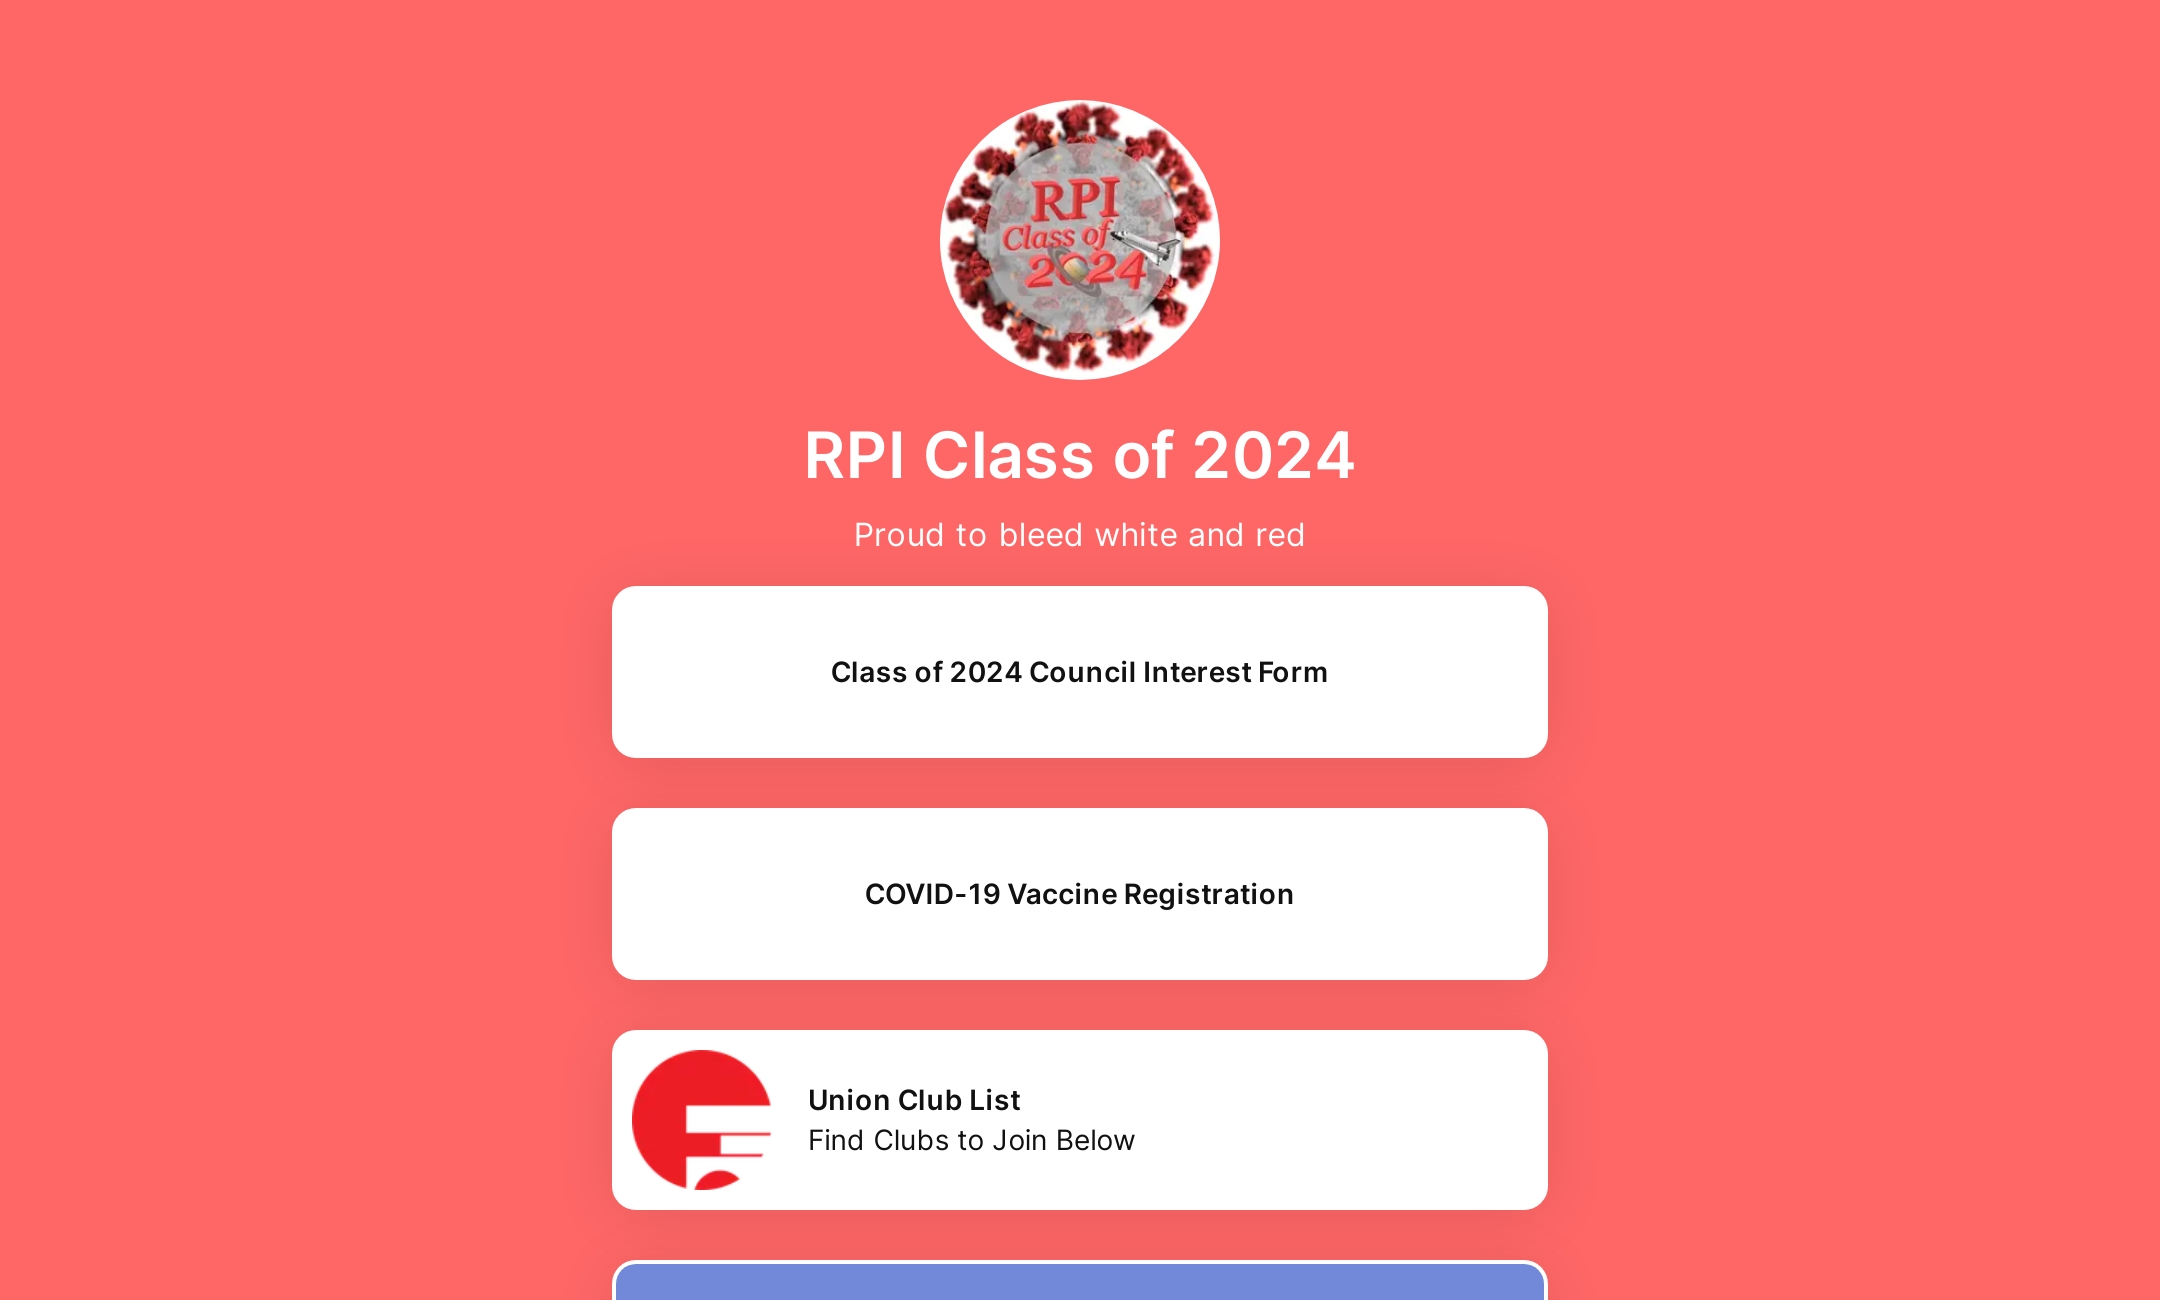 RPI Class of 2024's Flowpage